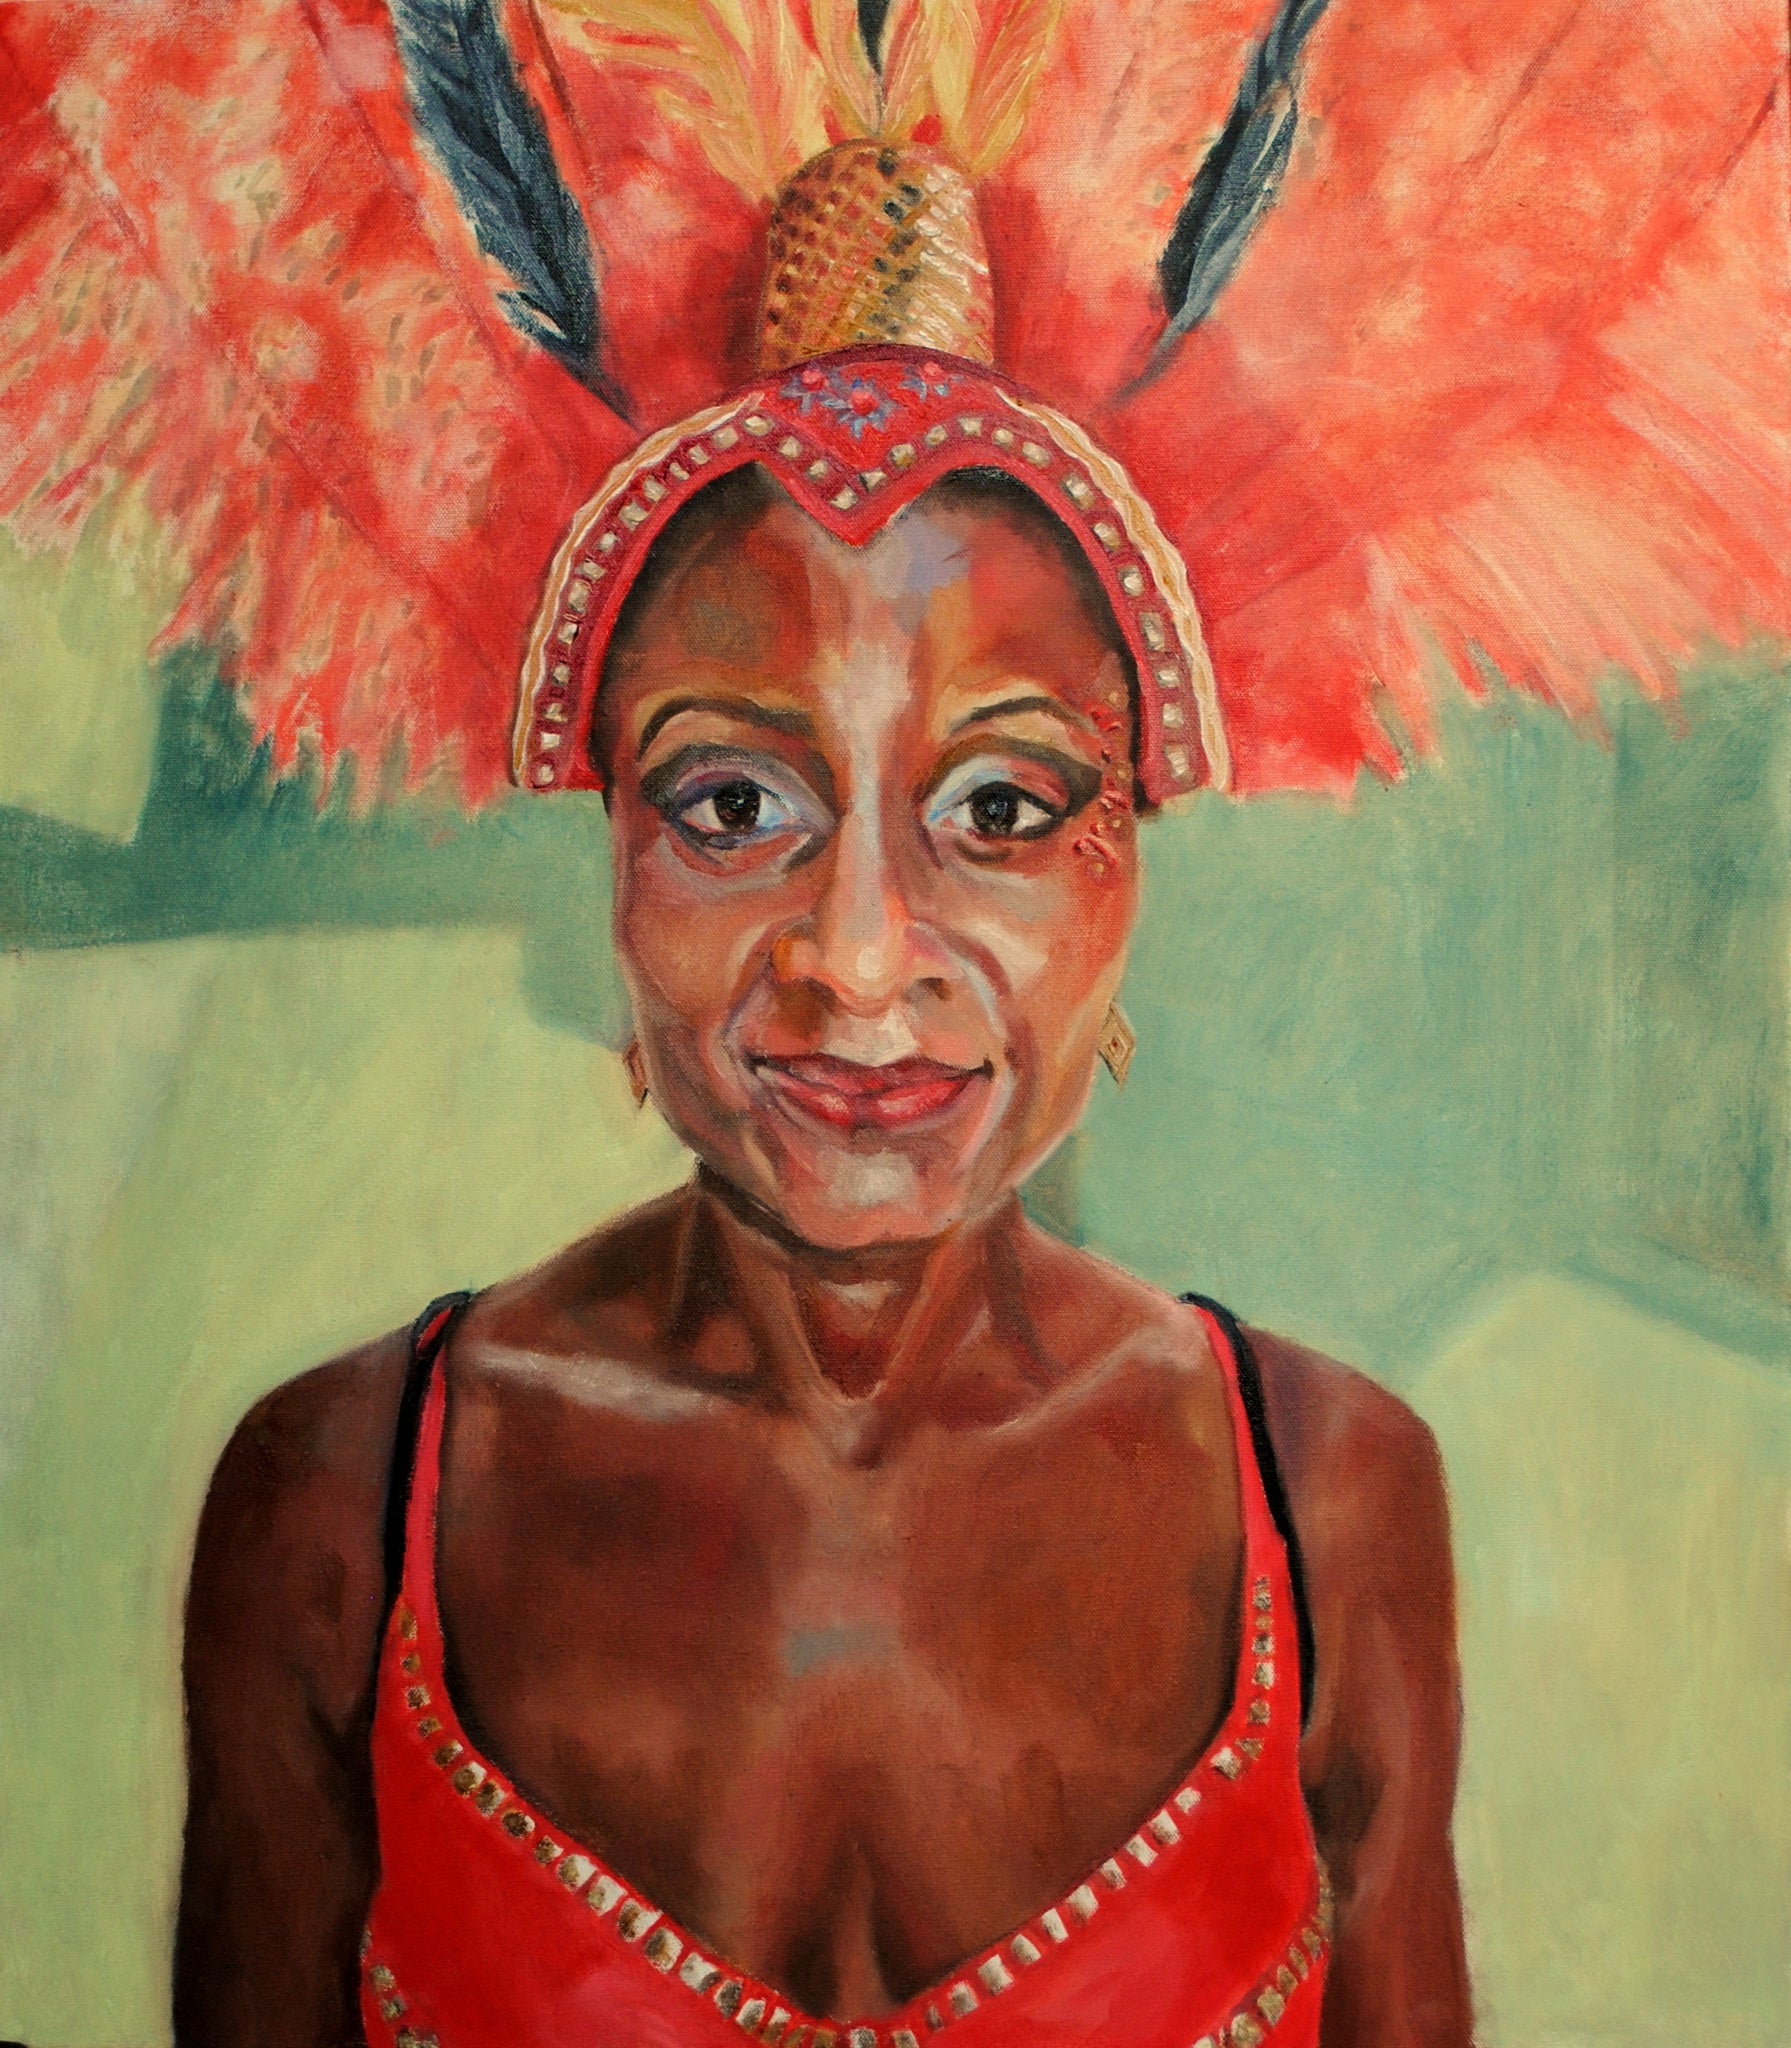 Jumping up! portrait of a Notting Hill Carnival participant by British figurative artist Stella Tooth